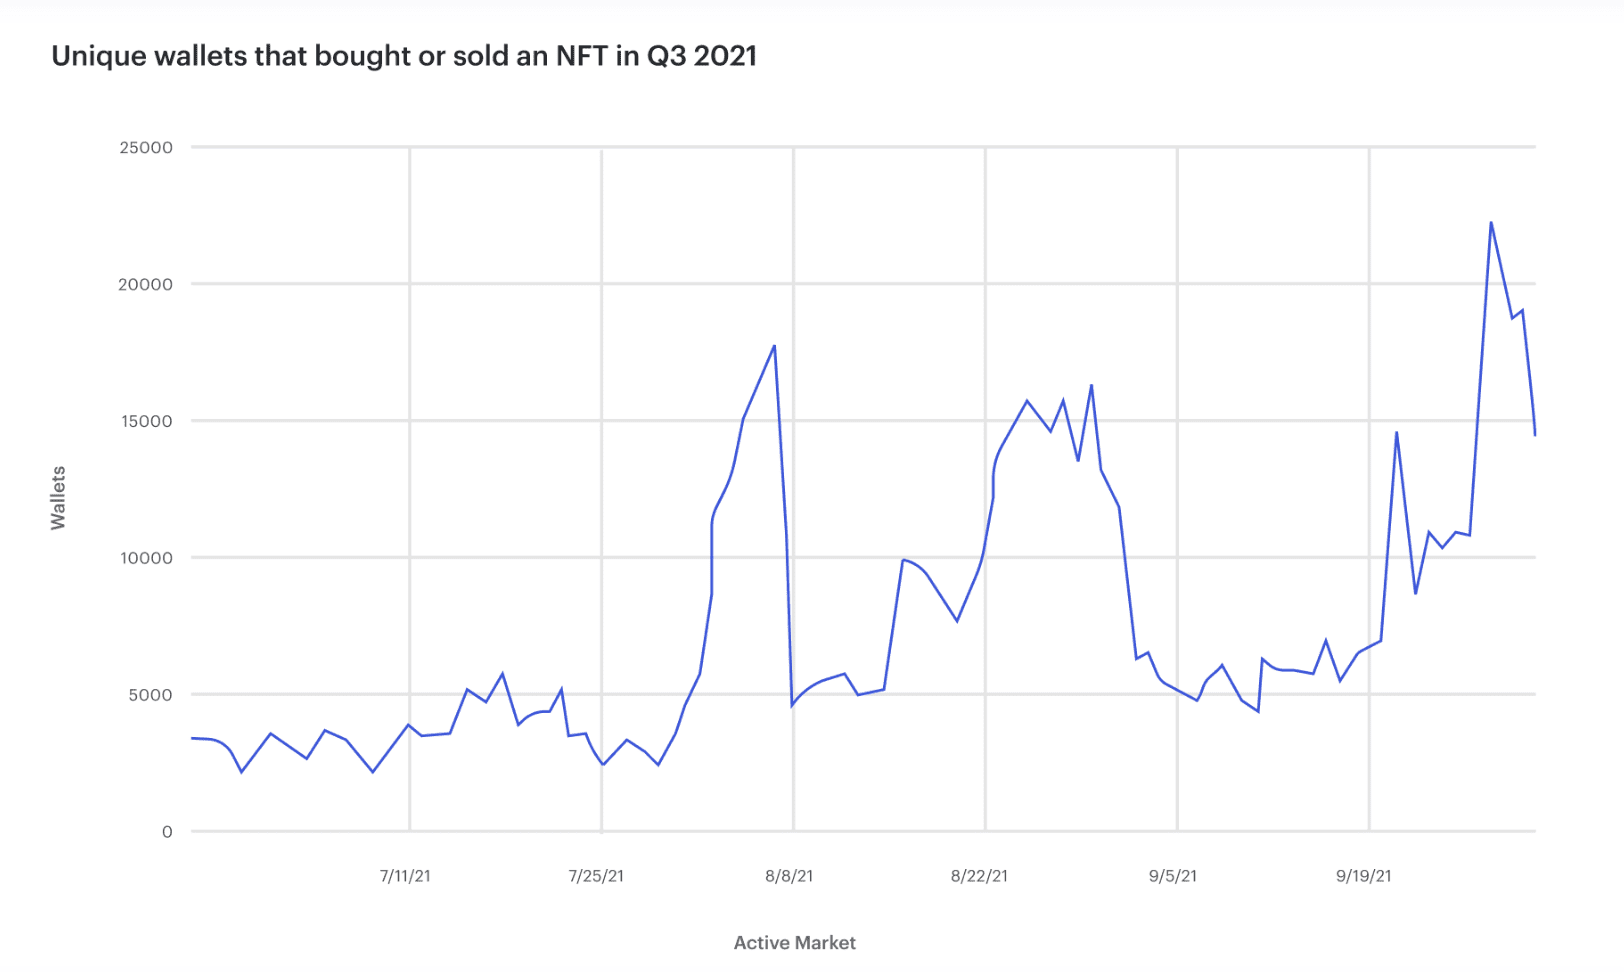 graph showing unique wallets that bought or sold an NFT in Q3 2021